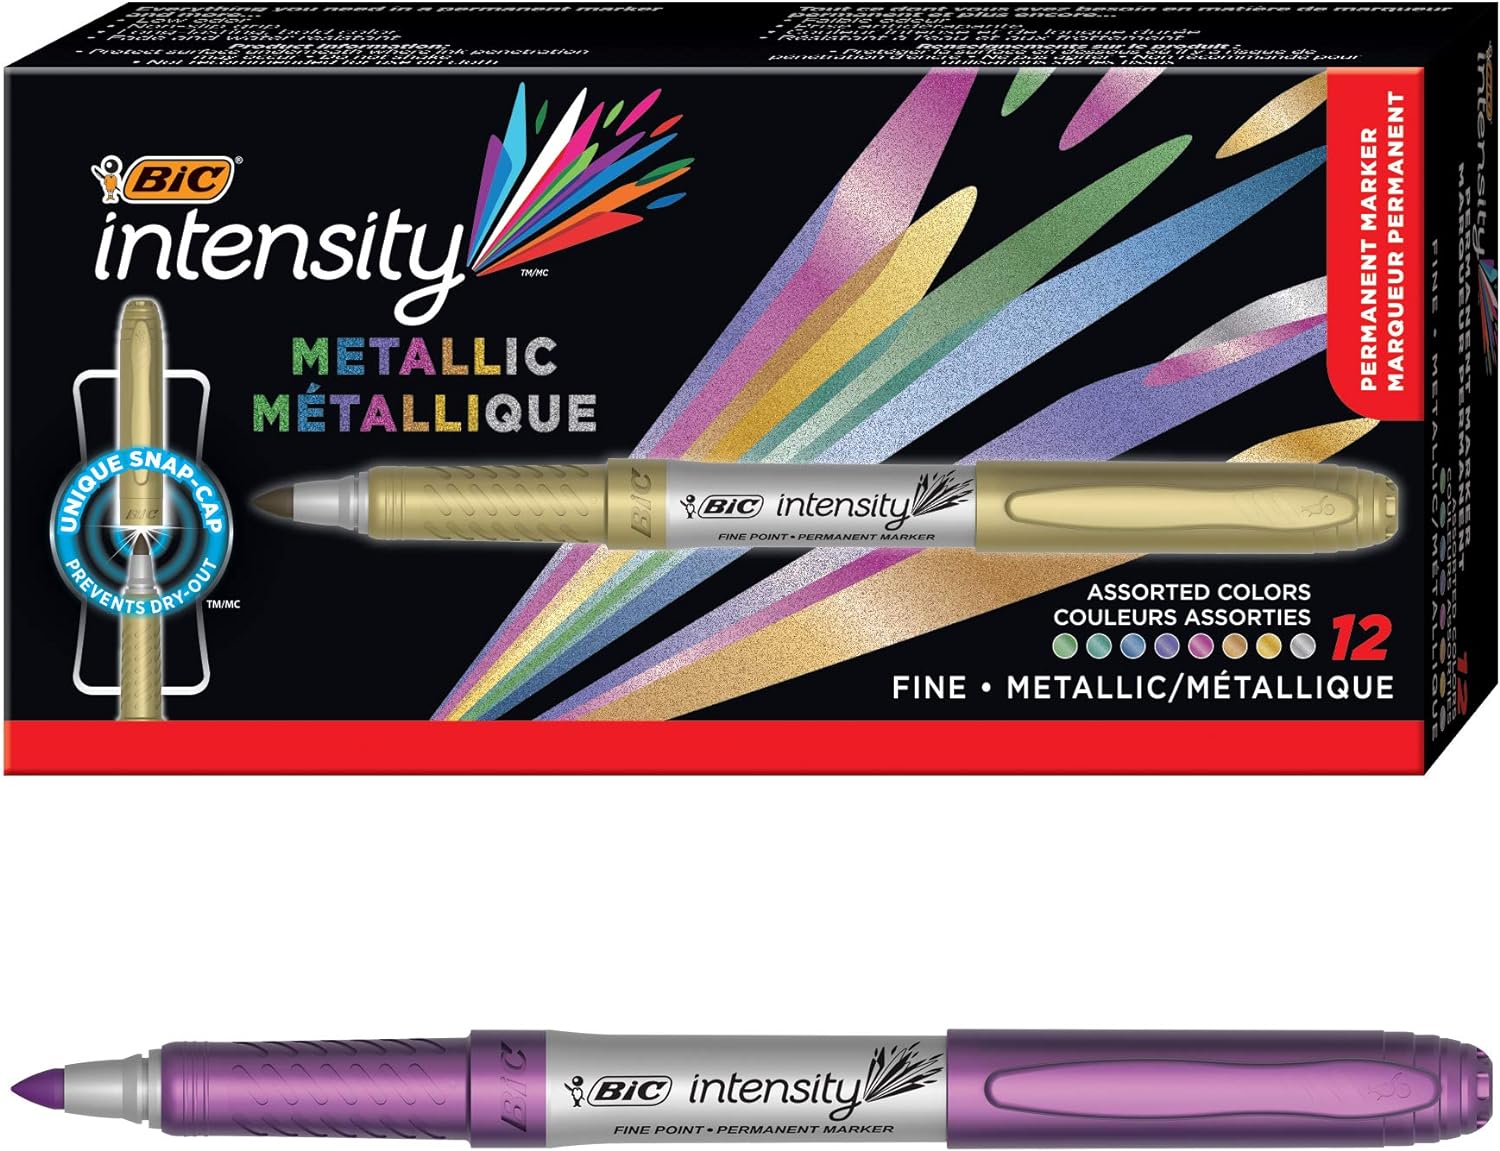 BIC Intensity Metallic Permanent Marker, Fine Point, Assorted Metallic Colors, Box of 12 Permanent Markers